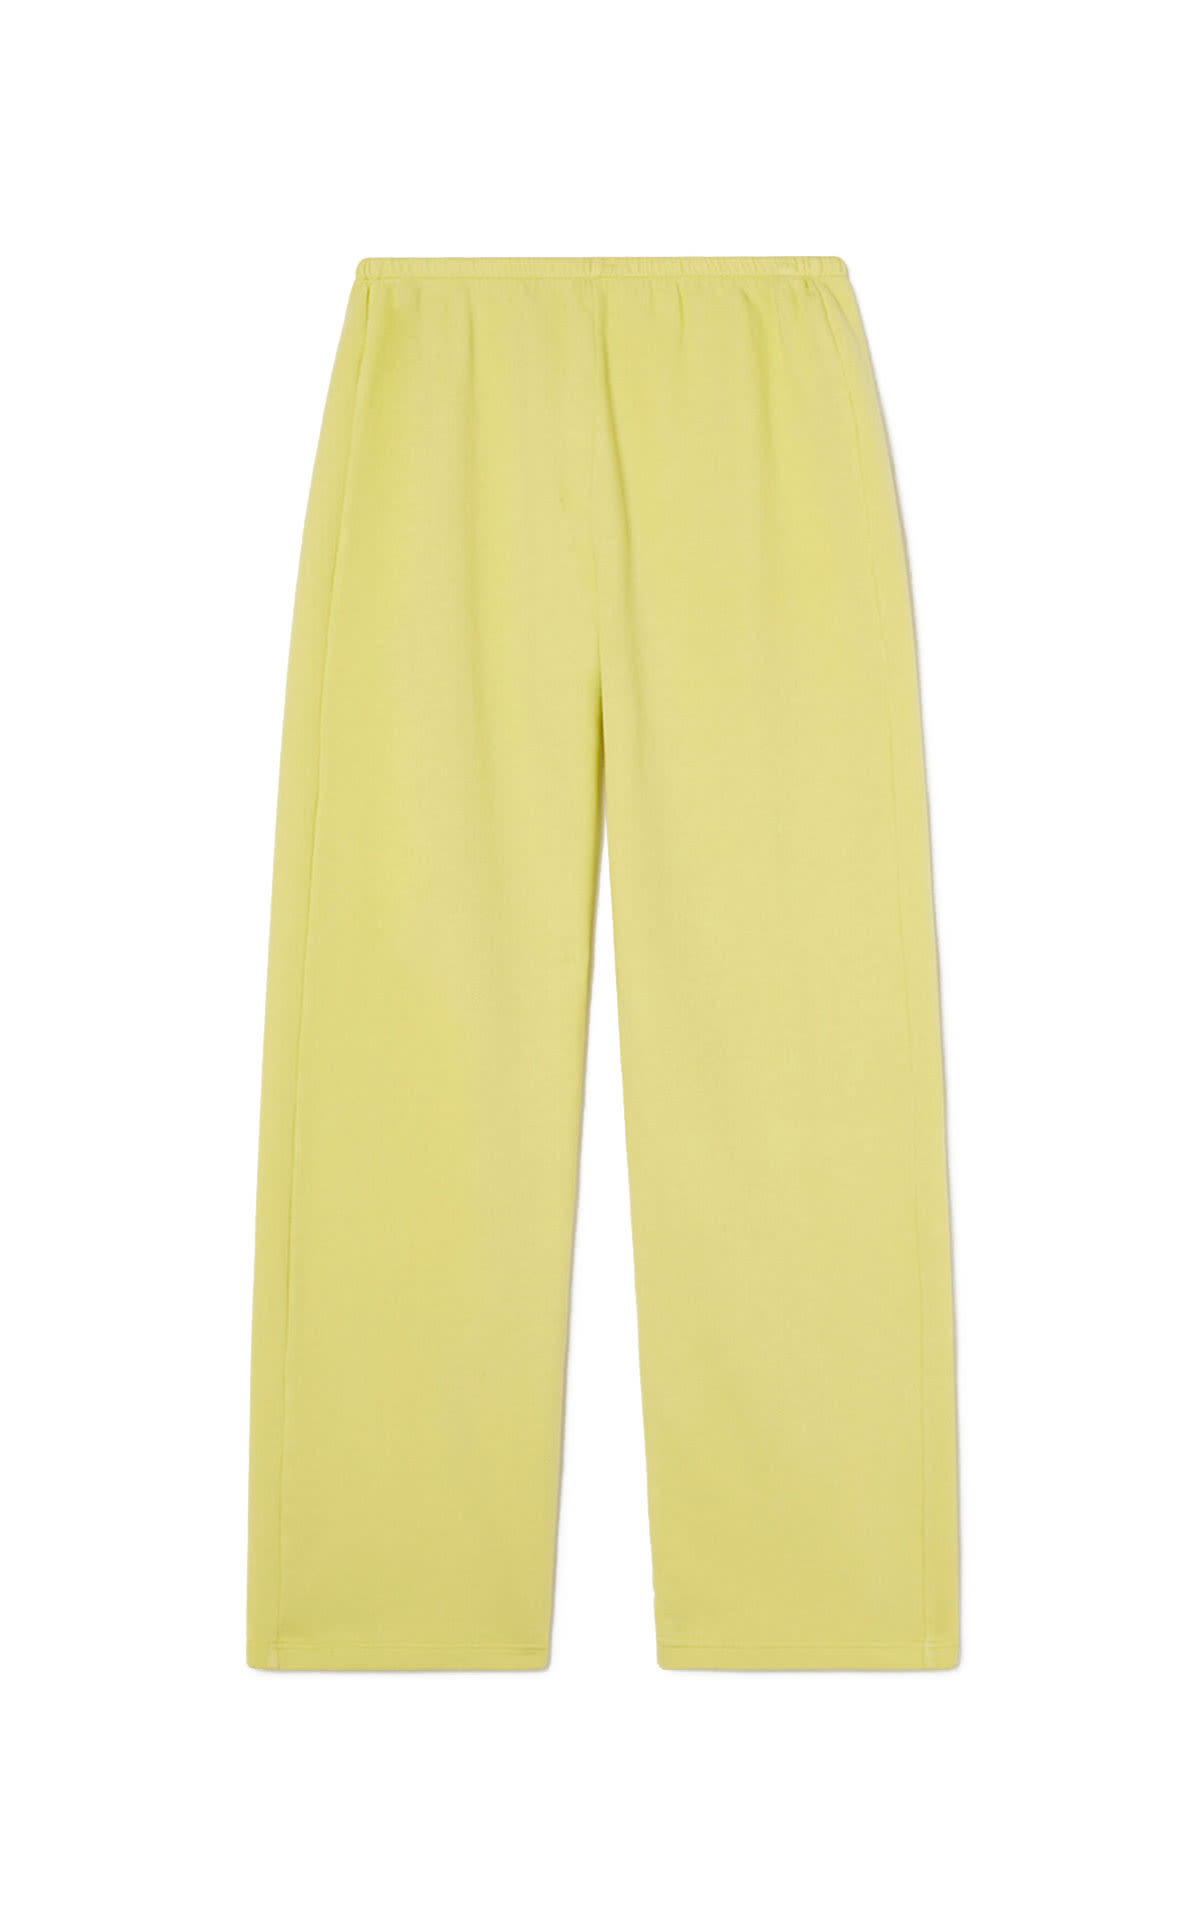 yellow flared pants American Vintage